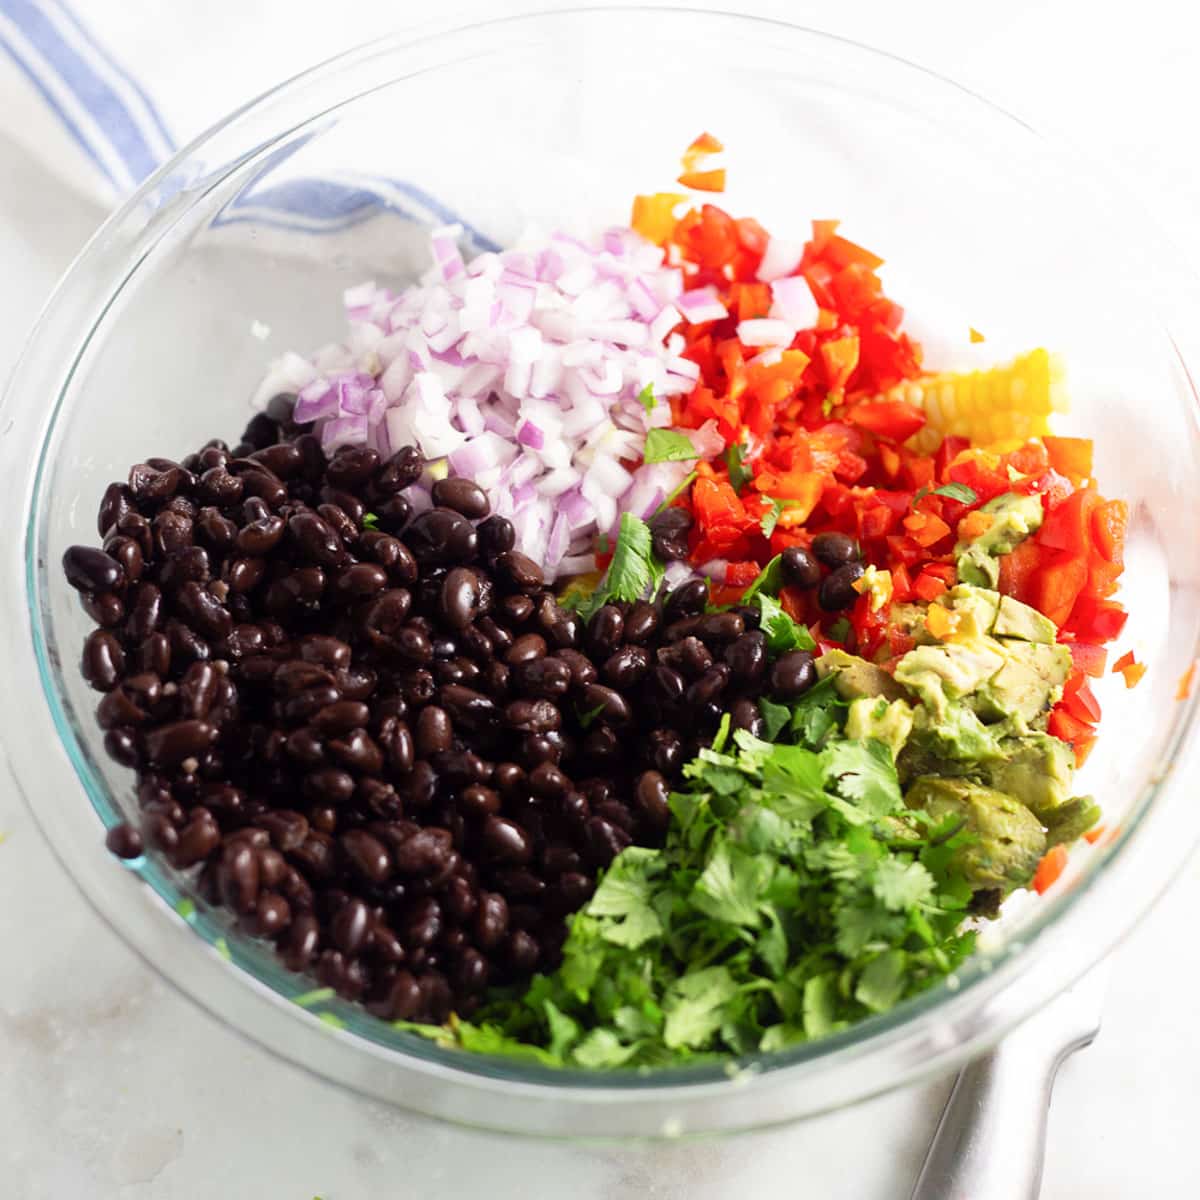 ingredients for black bean salad in a bowl